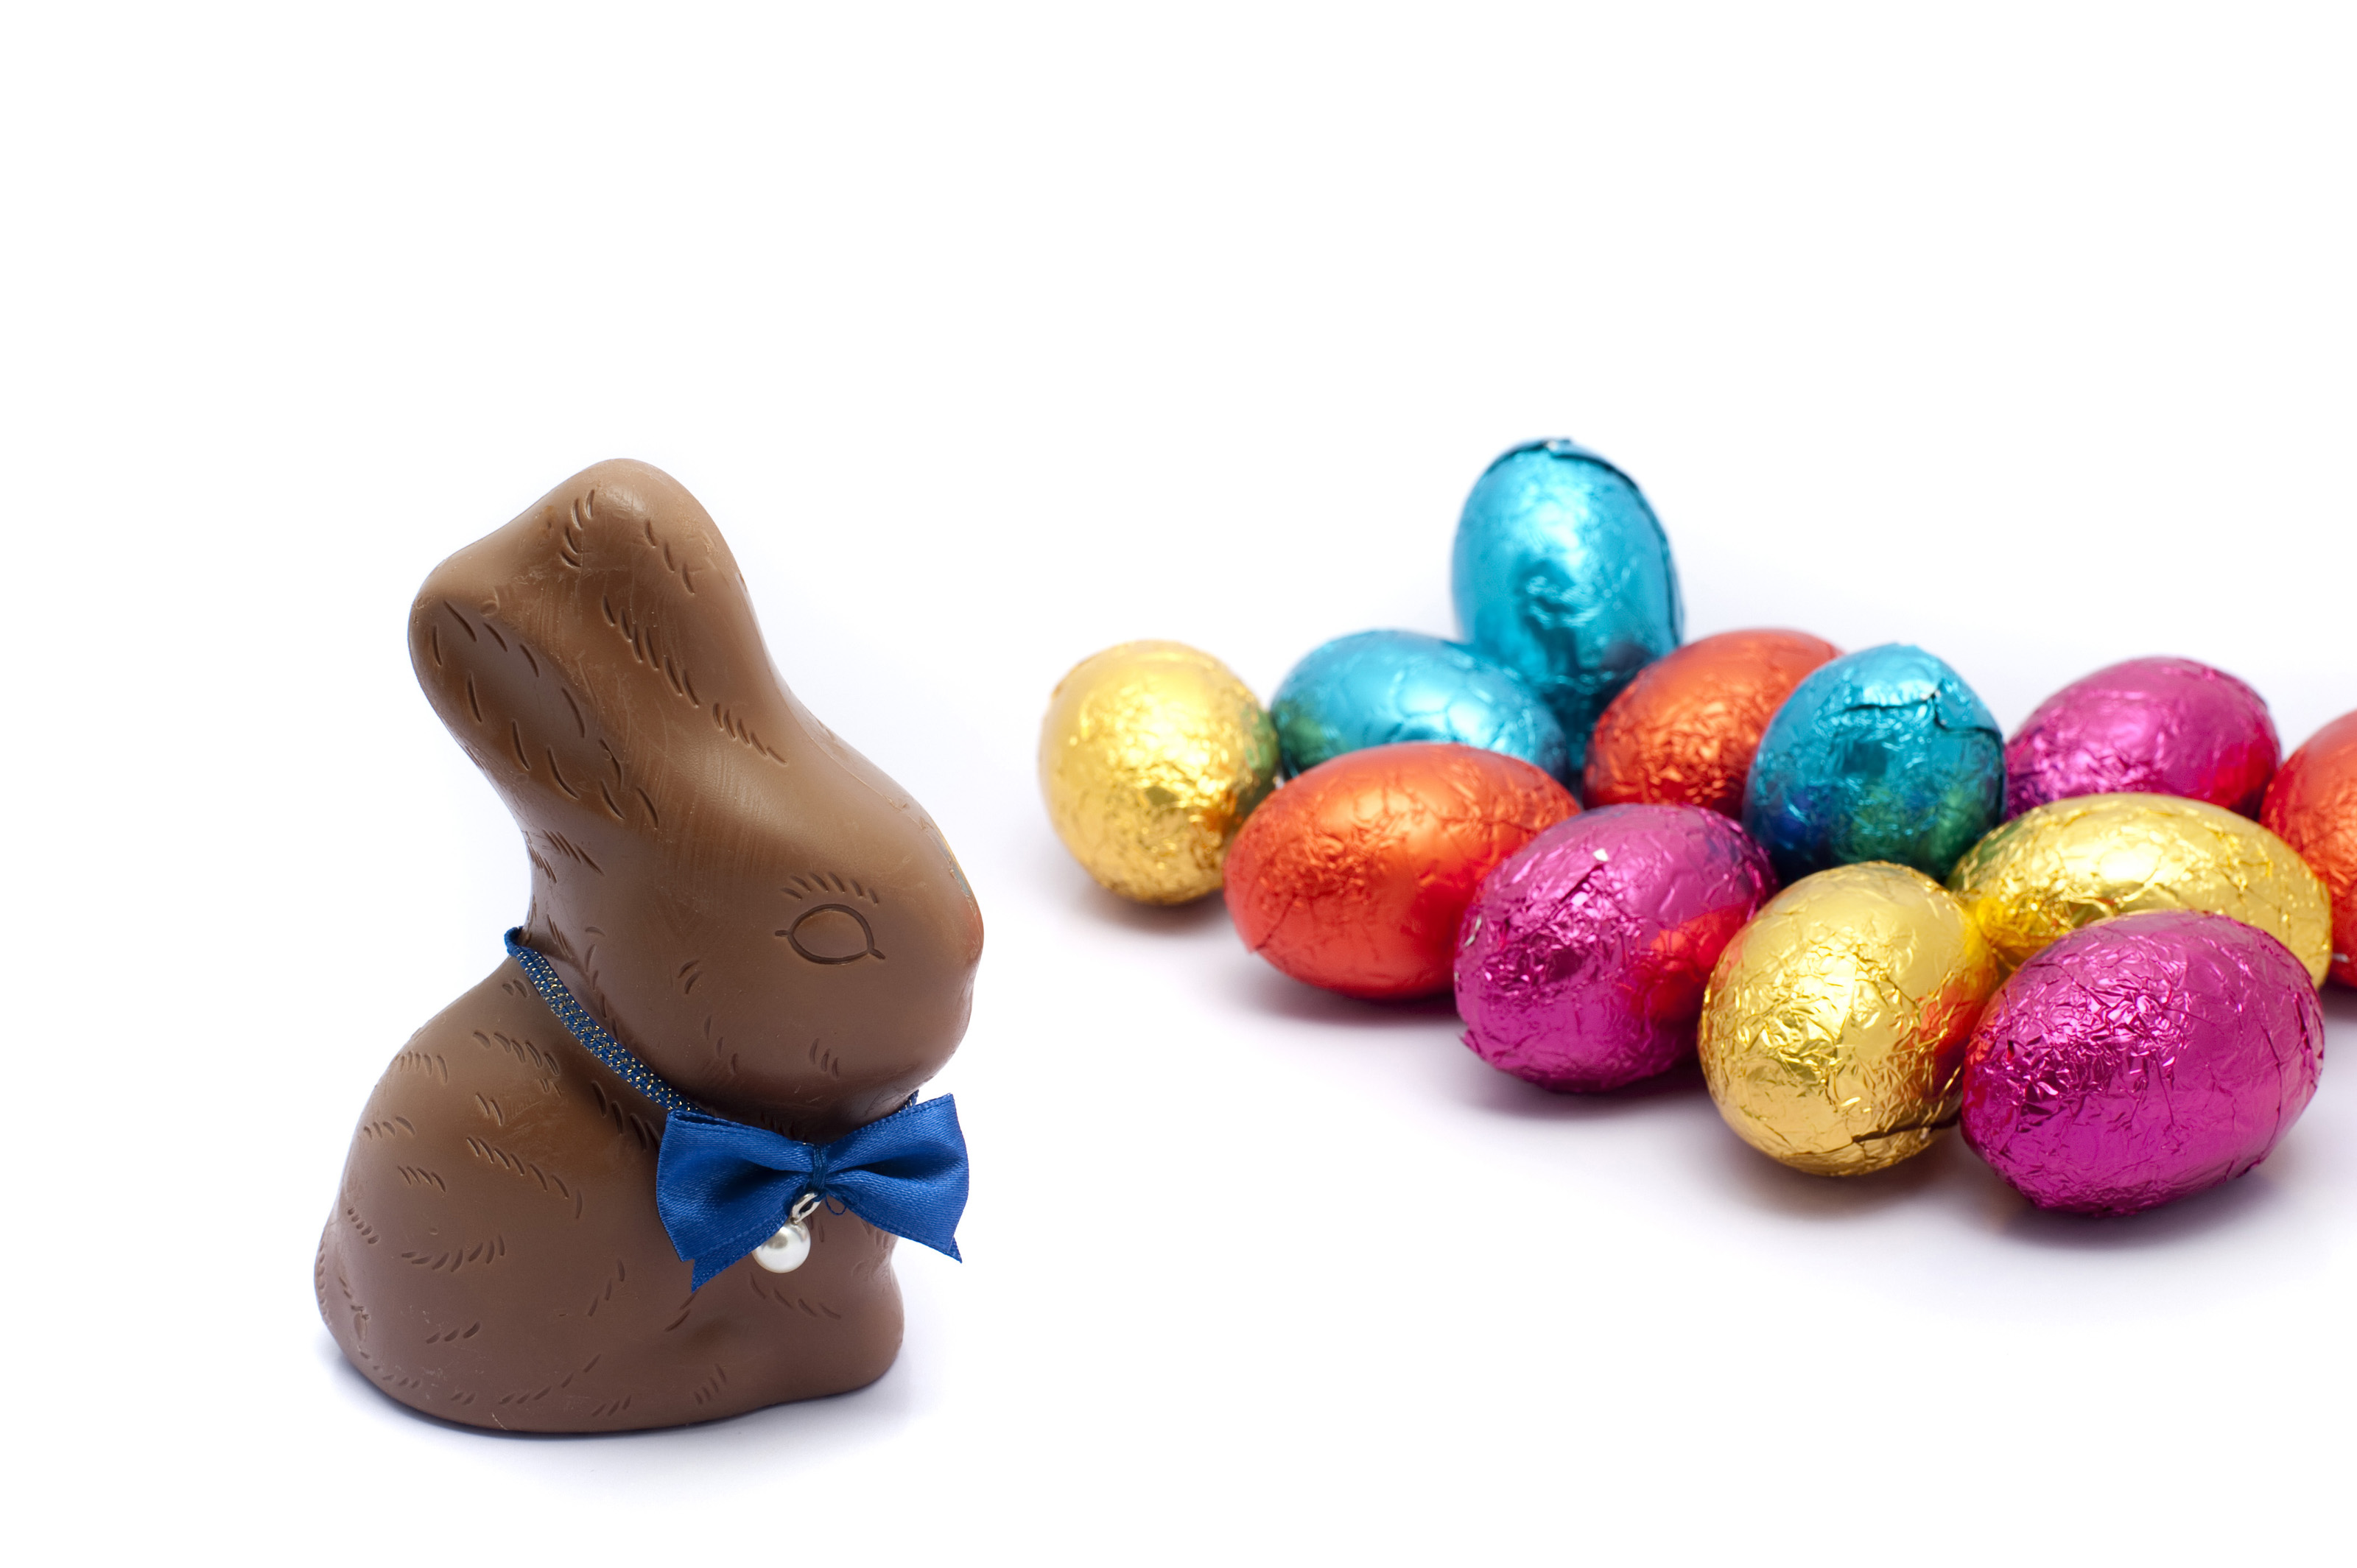 Easter Bunny In Chocolate Eggs Free Stock Photo 7898 Chocolate Easter Egg A...